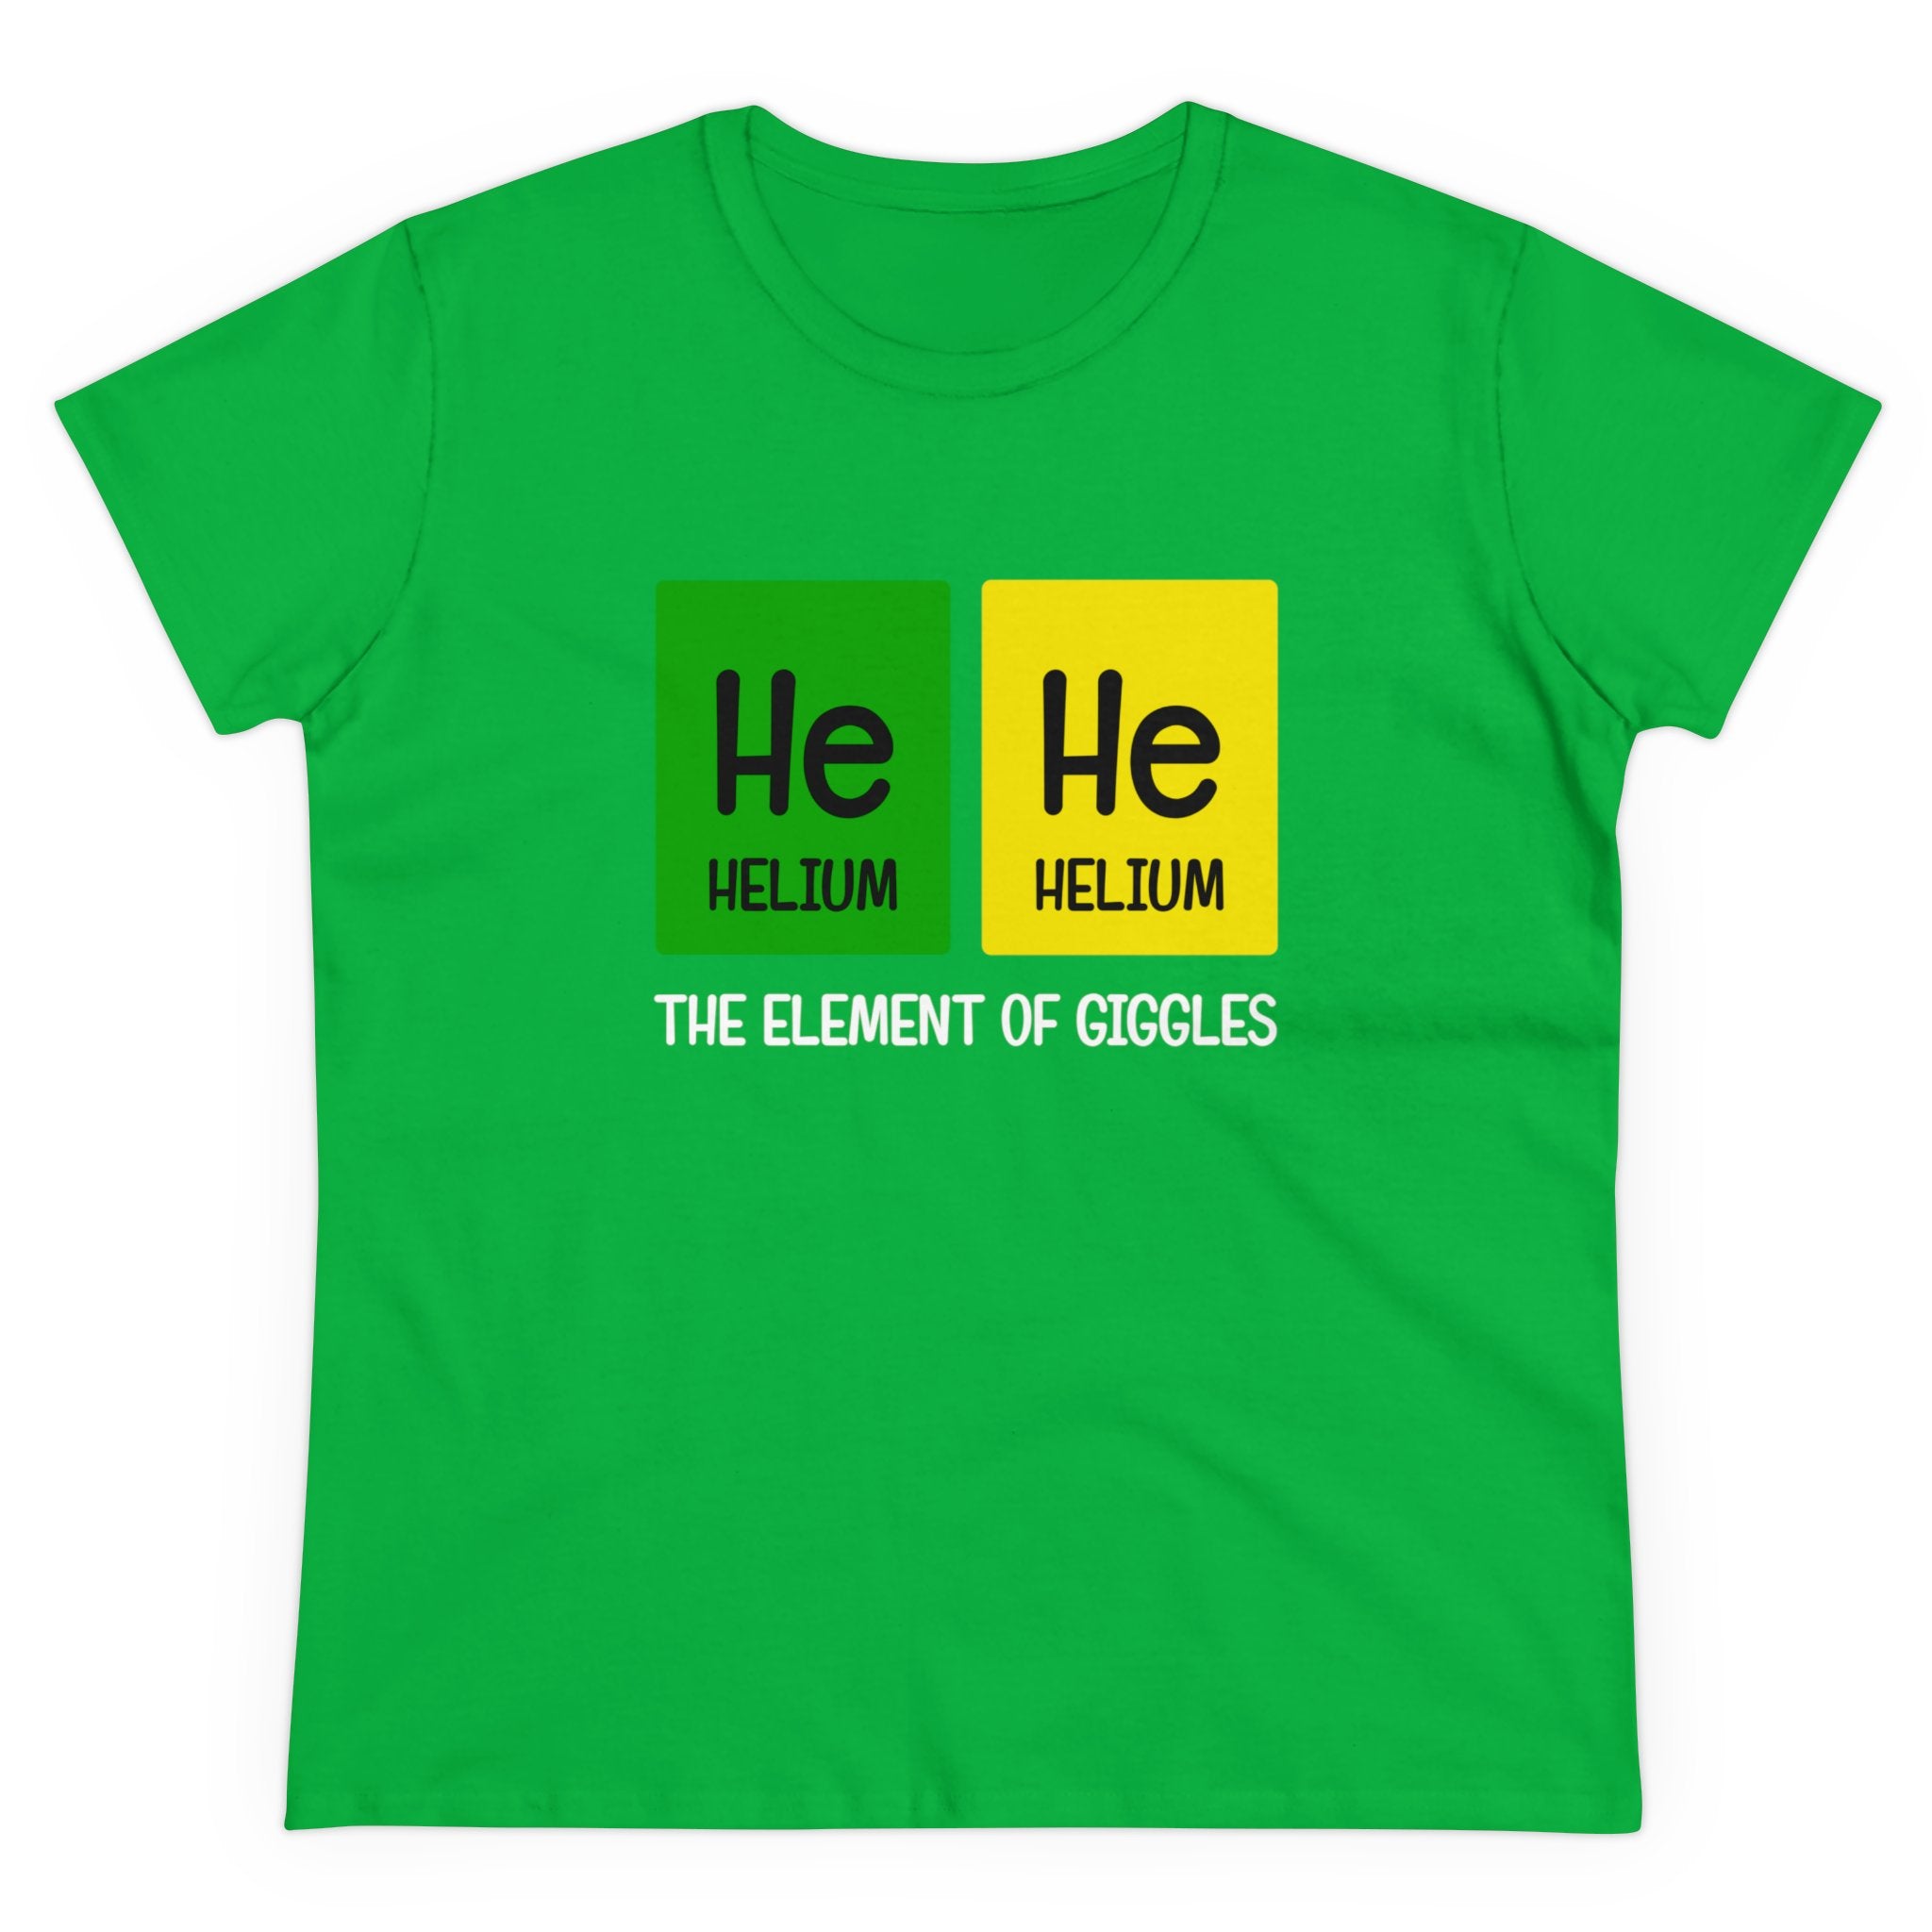 Green He-He - Women's Tee featuring periodic table element Helium symbols 'He' colored in dark and light shades with the text "Helium, the element of giggles" below. Made from ethically grown cotton for an ultra-cozy feel, this stylish piece merges comfort with a touch of scientific humor.